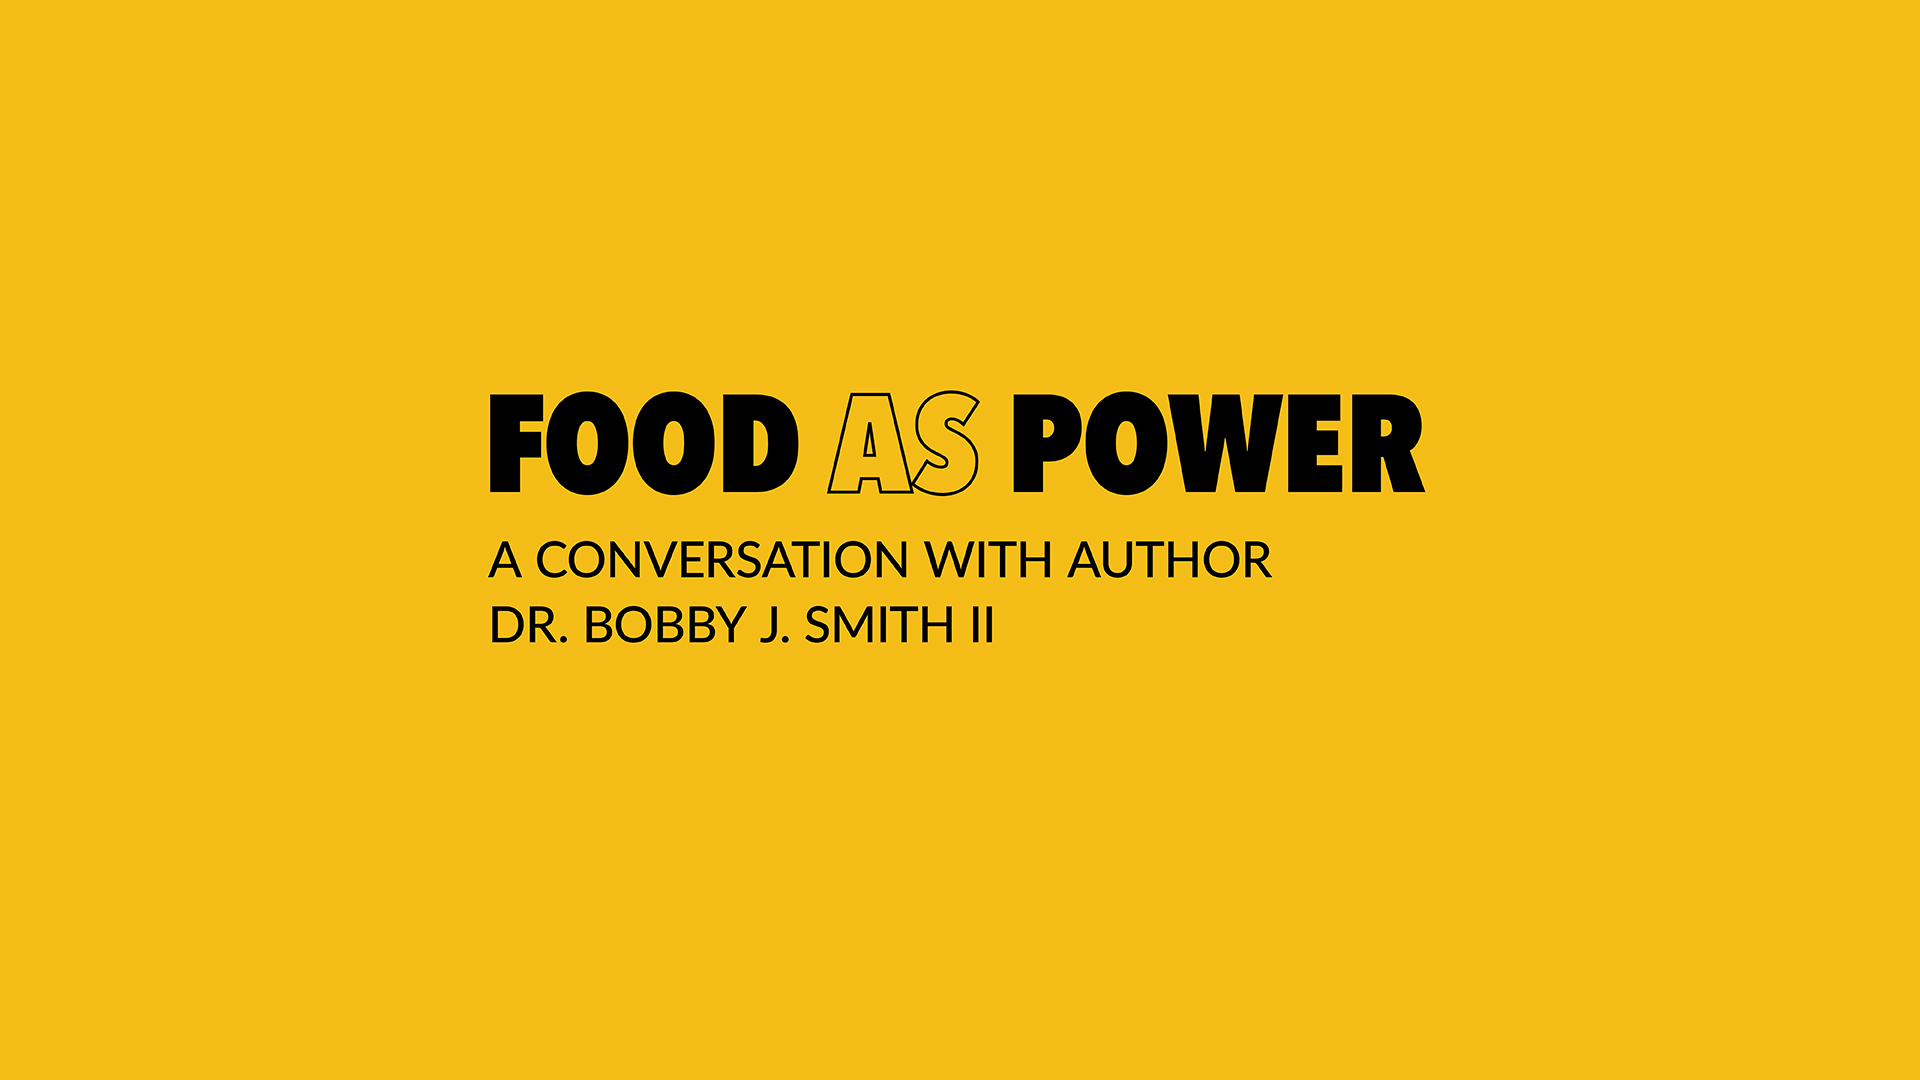 Food As Power title in bold lettering on a mustard color background